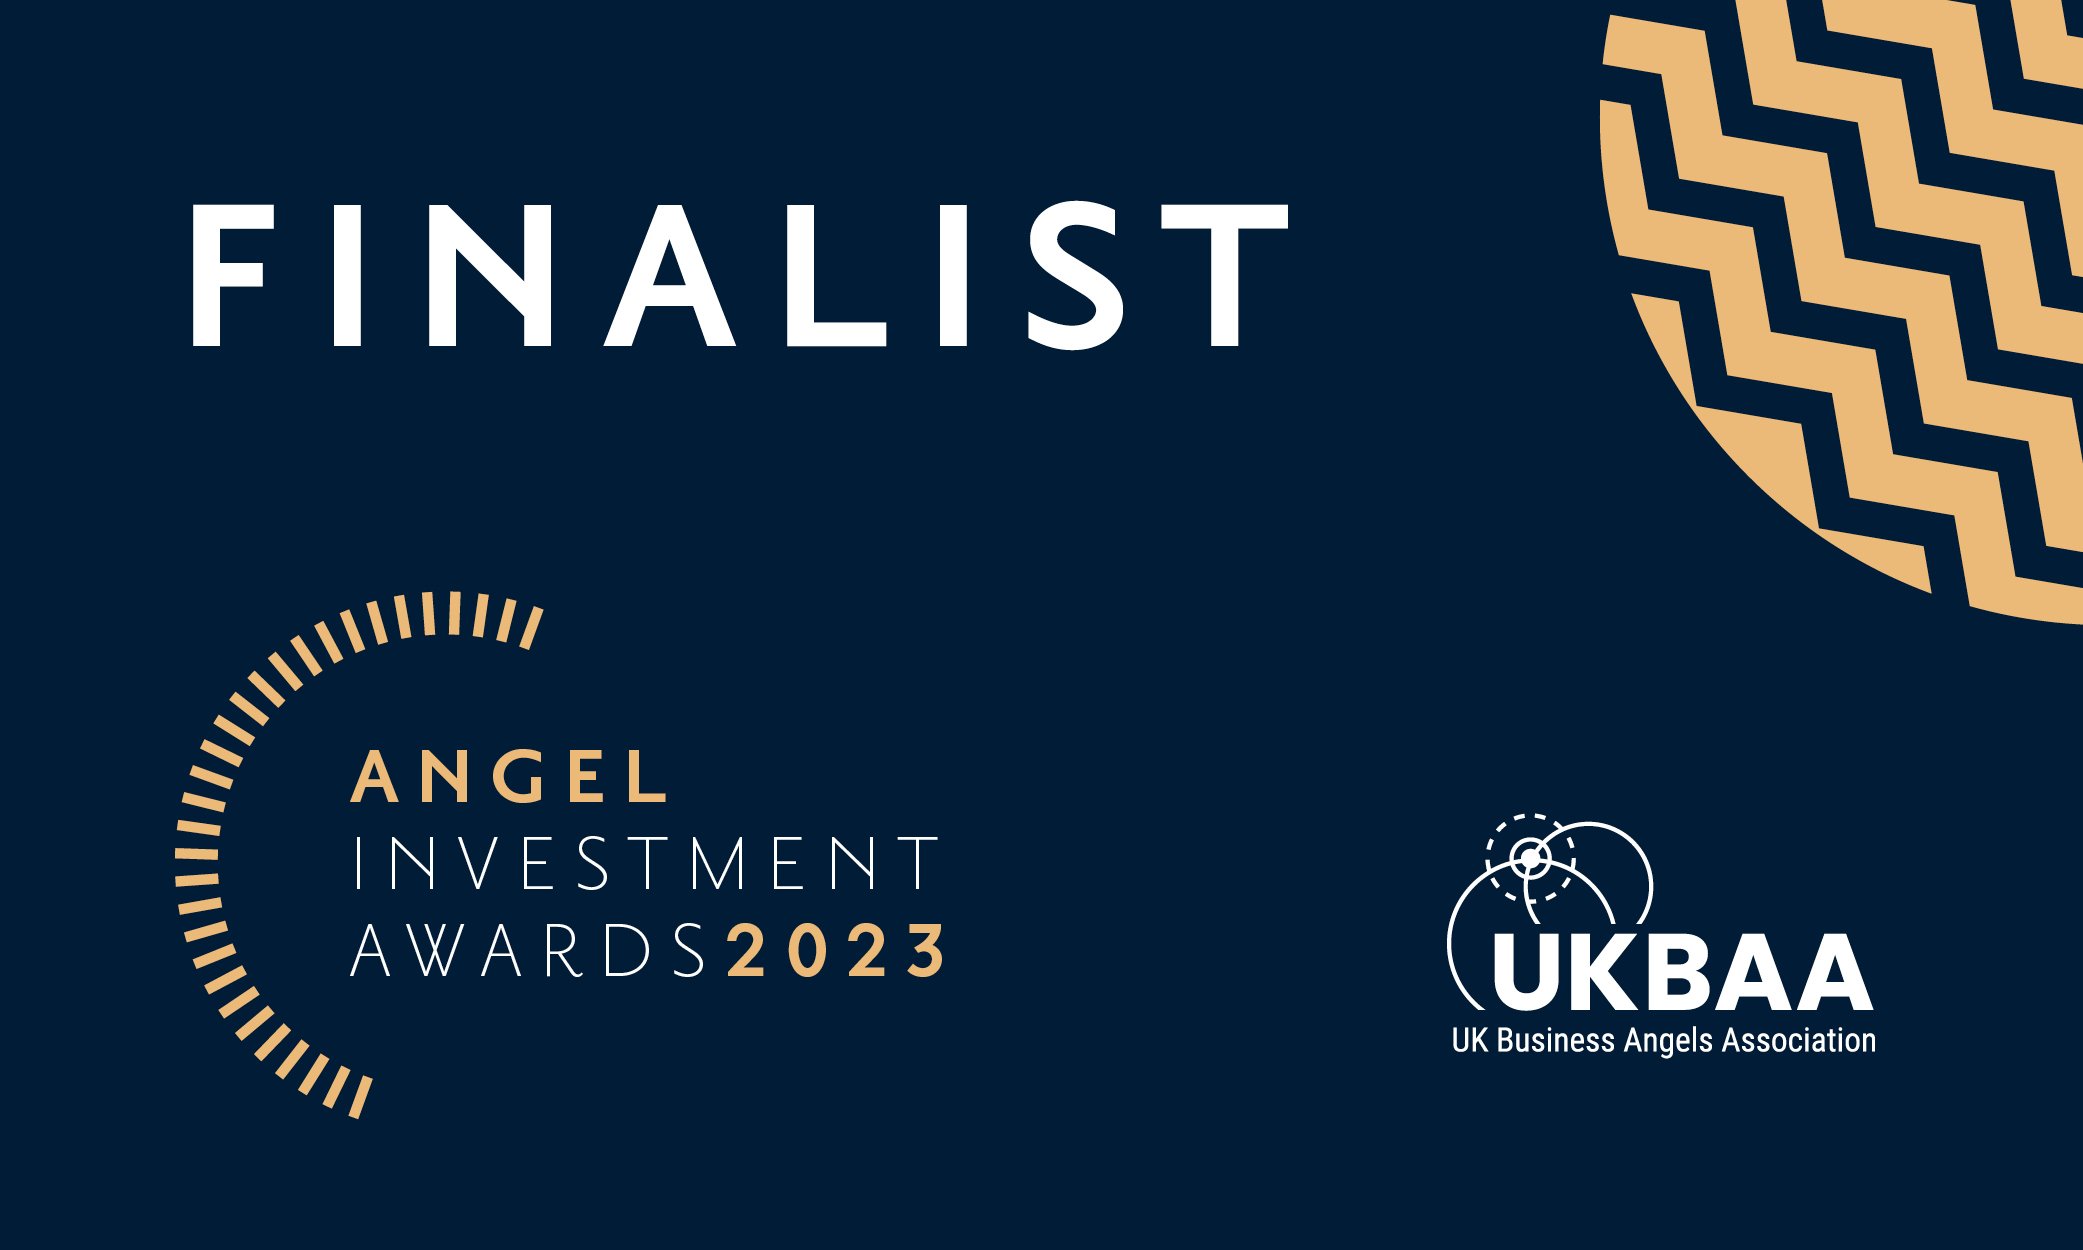 Michelmores shortlisted for Best Legal Team for Early Stage Deals at the UKBAA Angel Investment Awards 2023